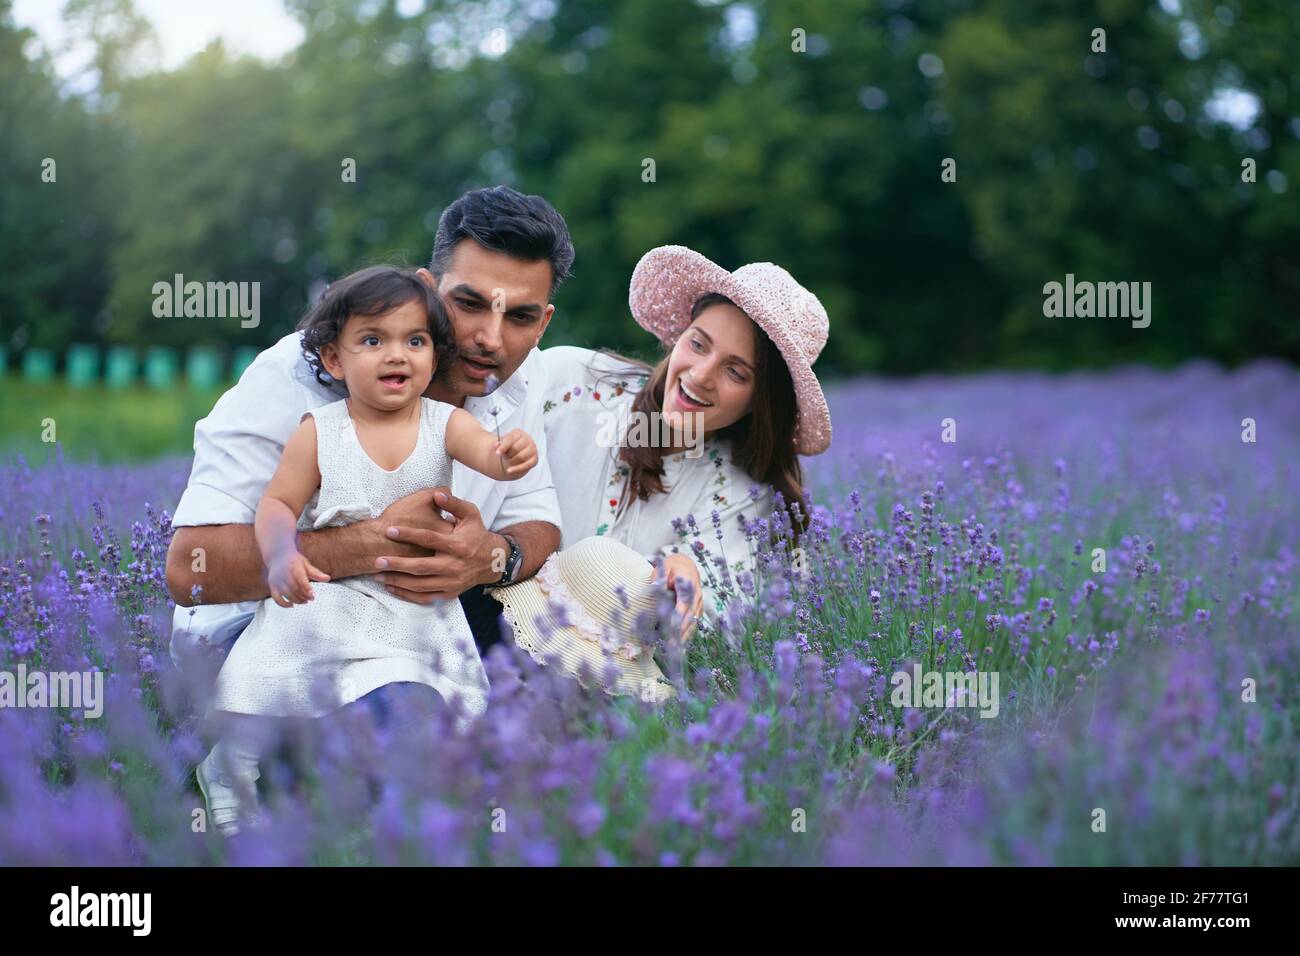 Front view of young mother, father and daughter posing in lavender meadow and smiling. Adorable baby girl holding flower and enjoying time with loving parents outdoors. Young family, nature concept. Stock Photo